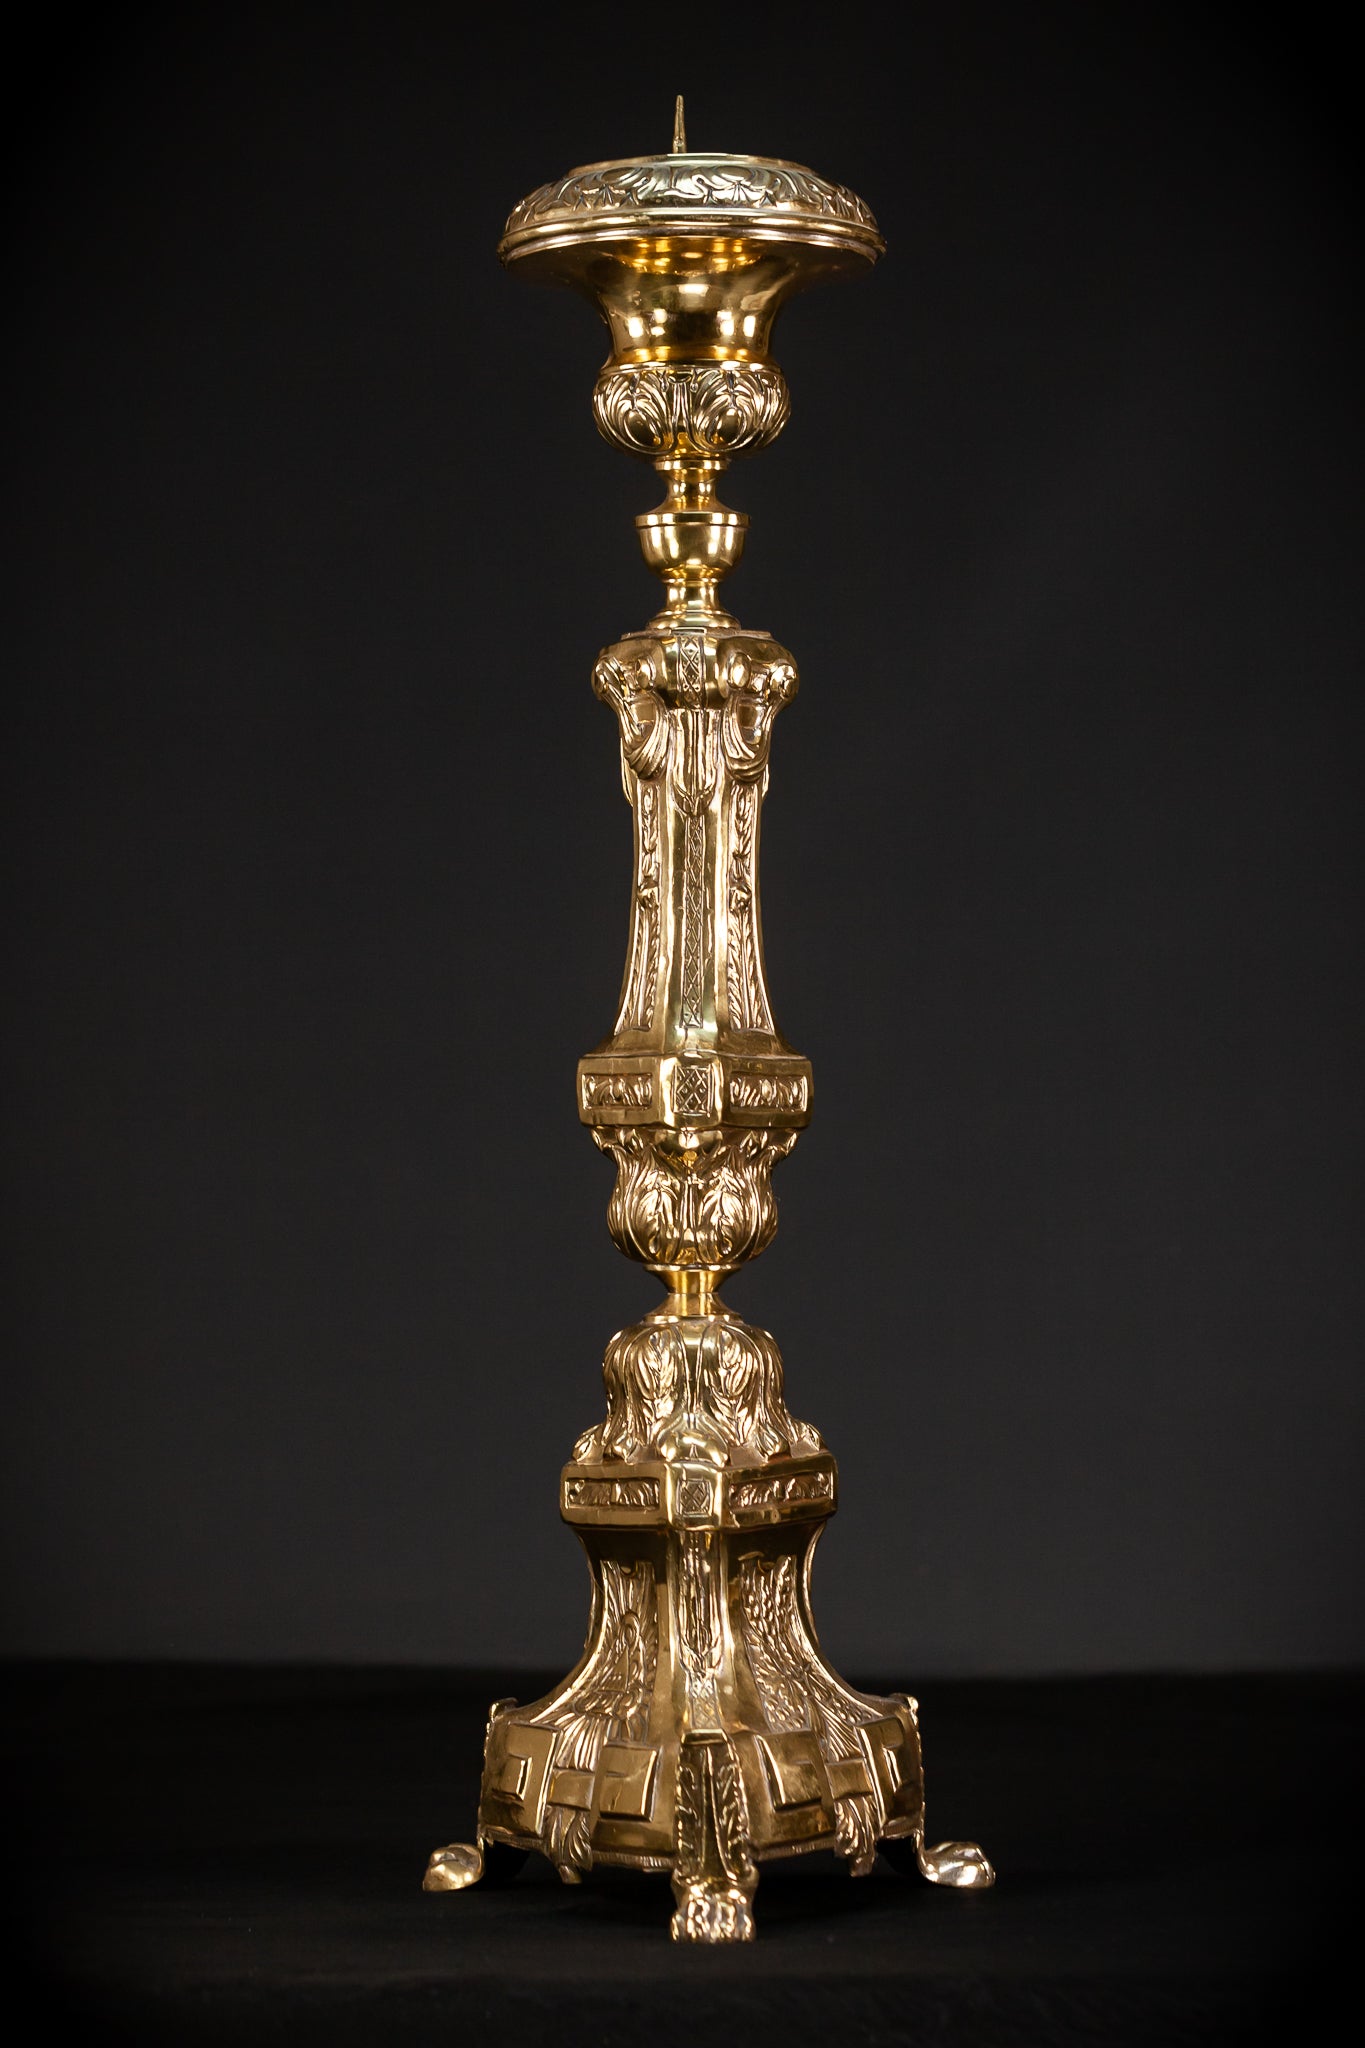 Pair of French Baroque Candlesticks | 1700s Antique | 26" / 66 cm